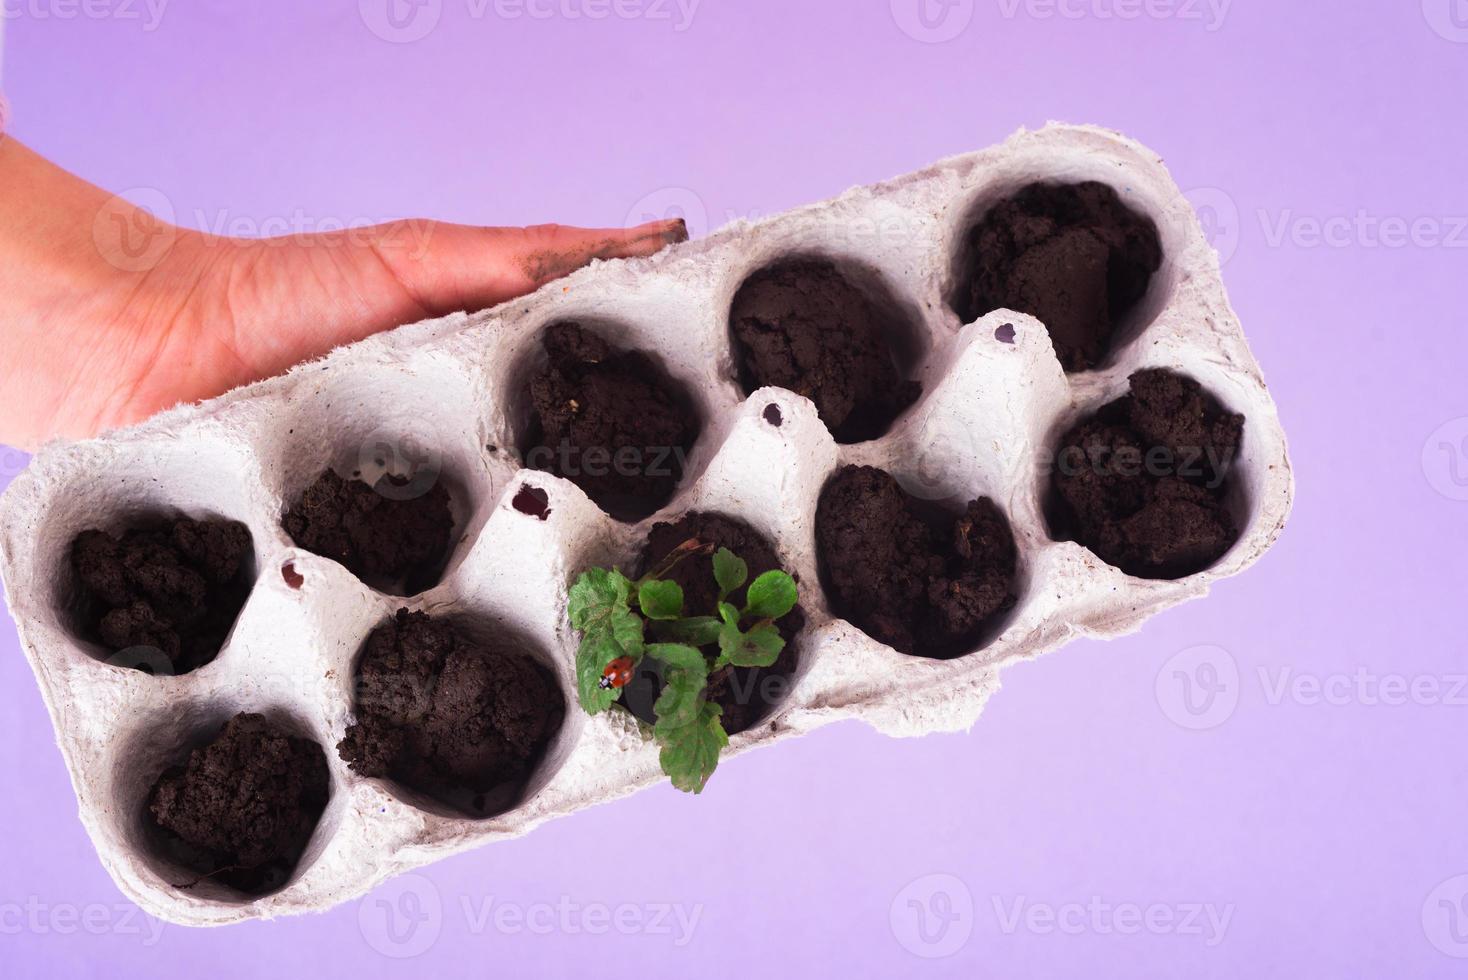 Small plats growing in carton chicken egg box in black soil. Break off the biodegradable paper cup and plant in soil photo